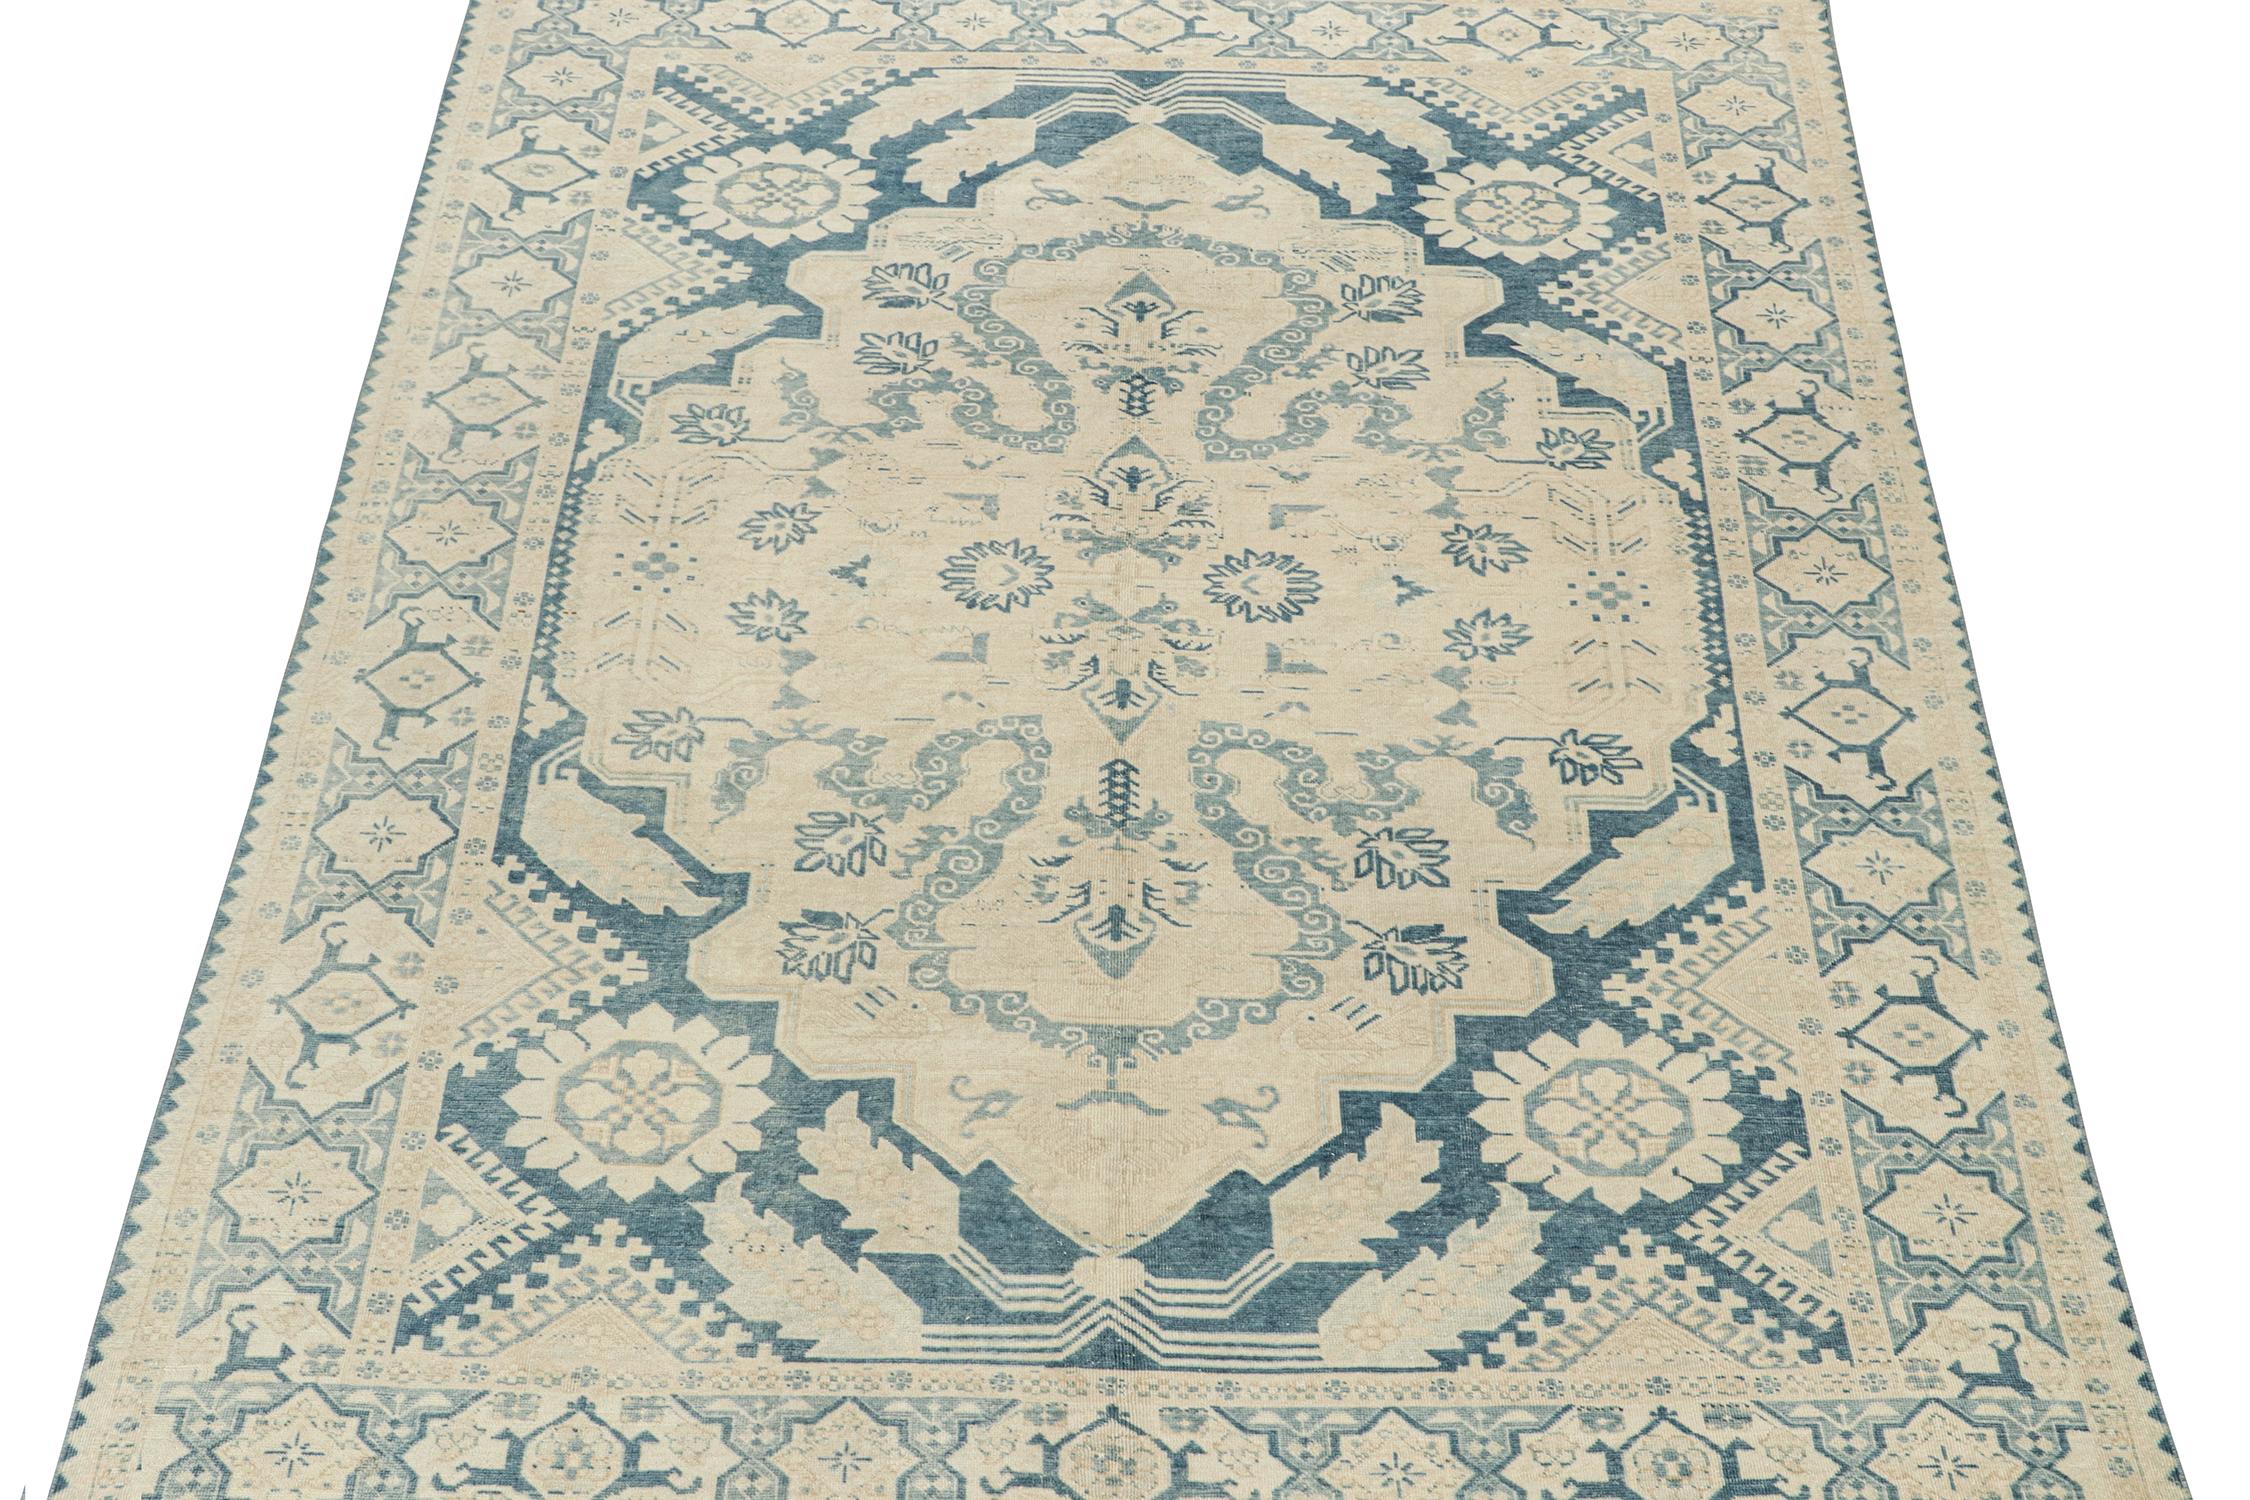 This vintage 7x10 rug is hand-knotted in wool, and originates from Turkey, circa 1950-1960. 

Its design features subtle inspirations from antique Persian rugs, uniquely reimagined in these forgiving colors. Both the field and border host elegant